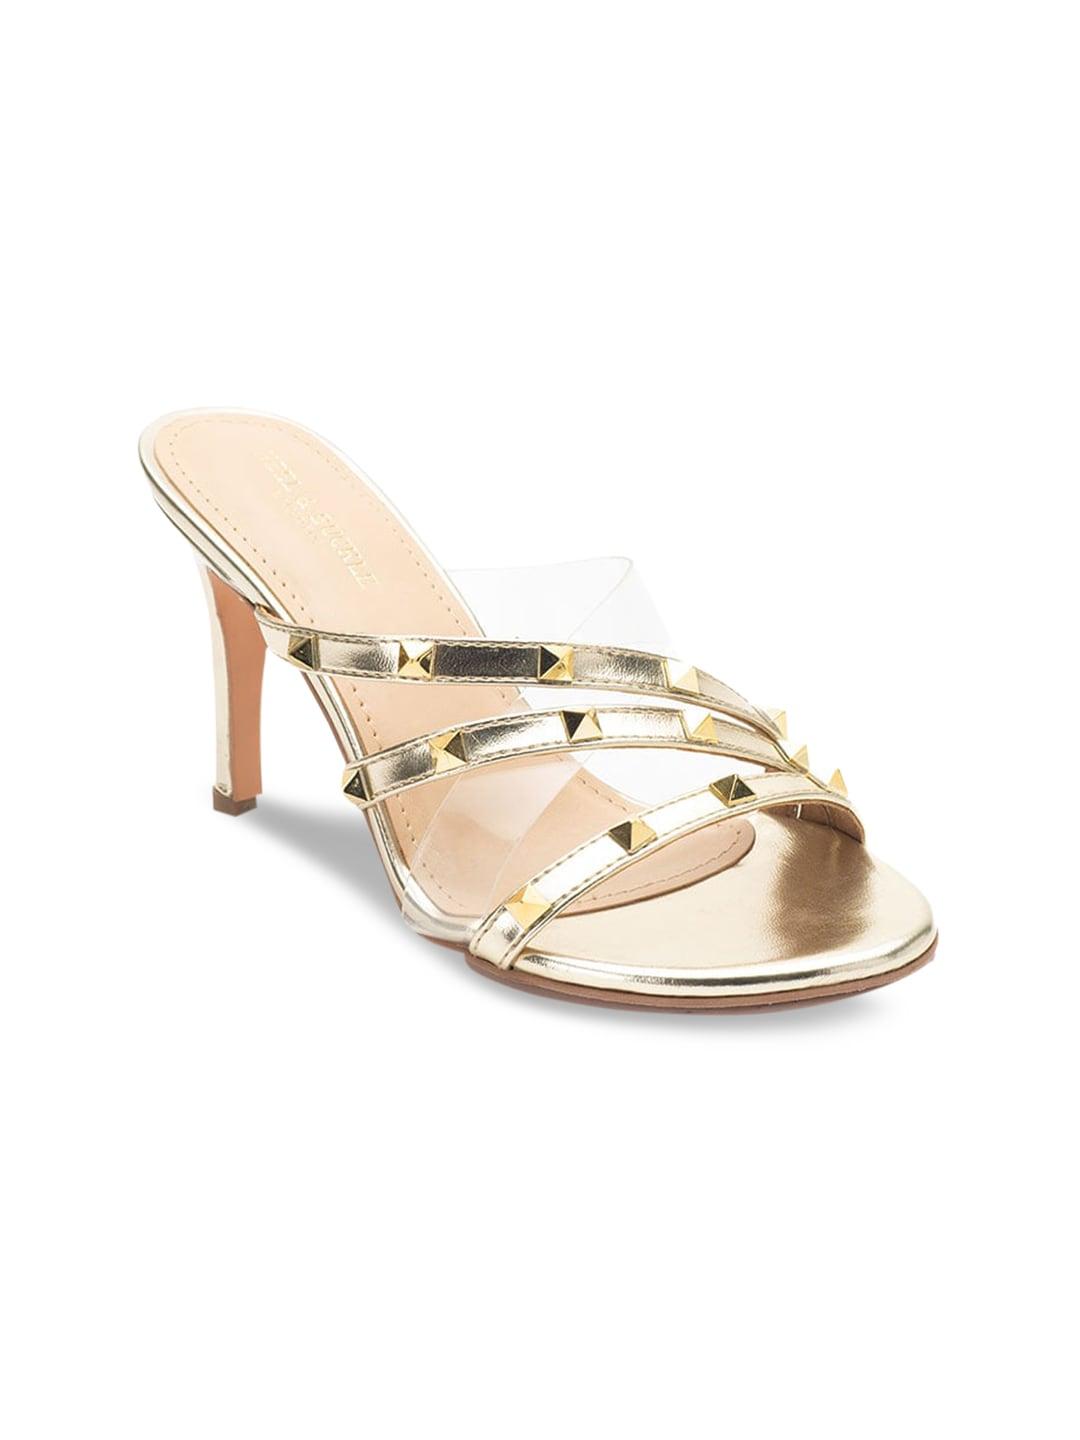 heel-&-buckle-london-gold-toned-embellished-leather-party-sandals